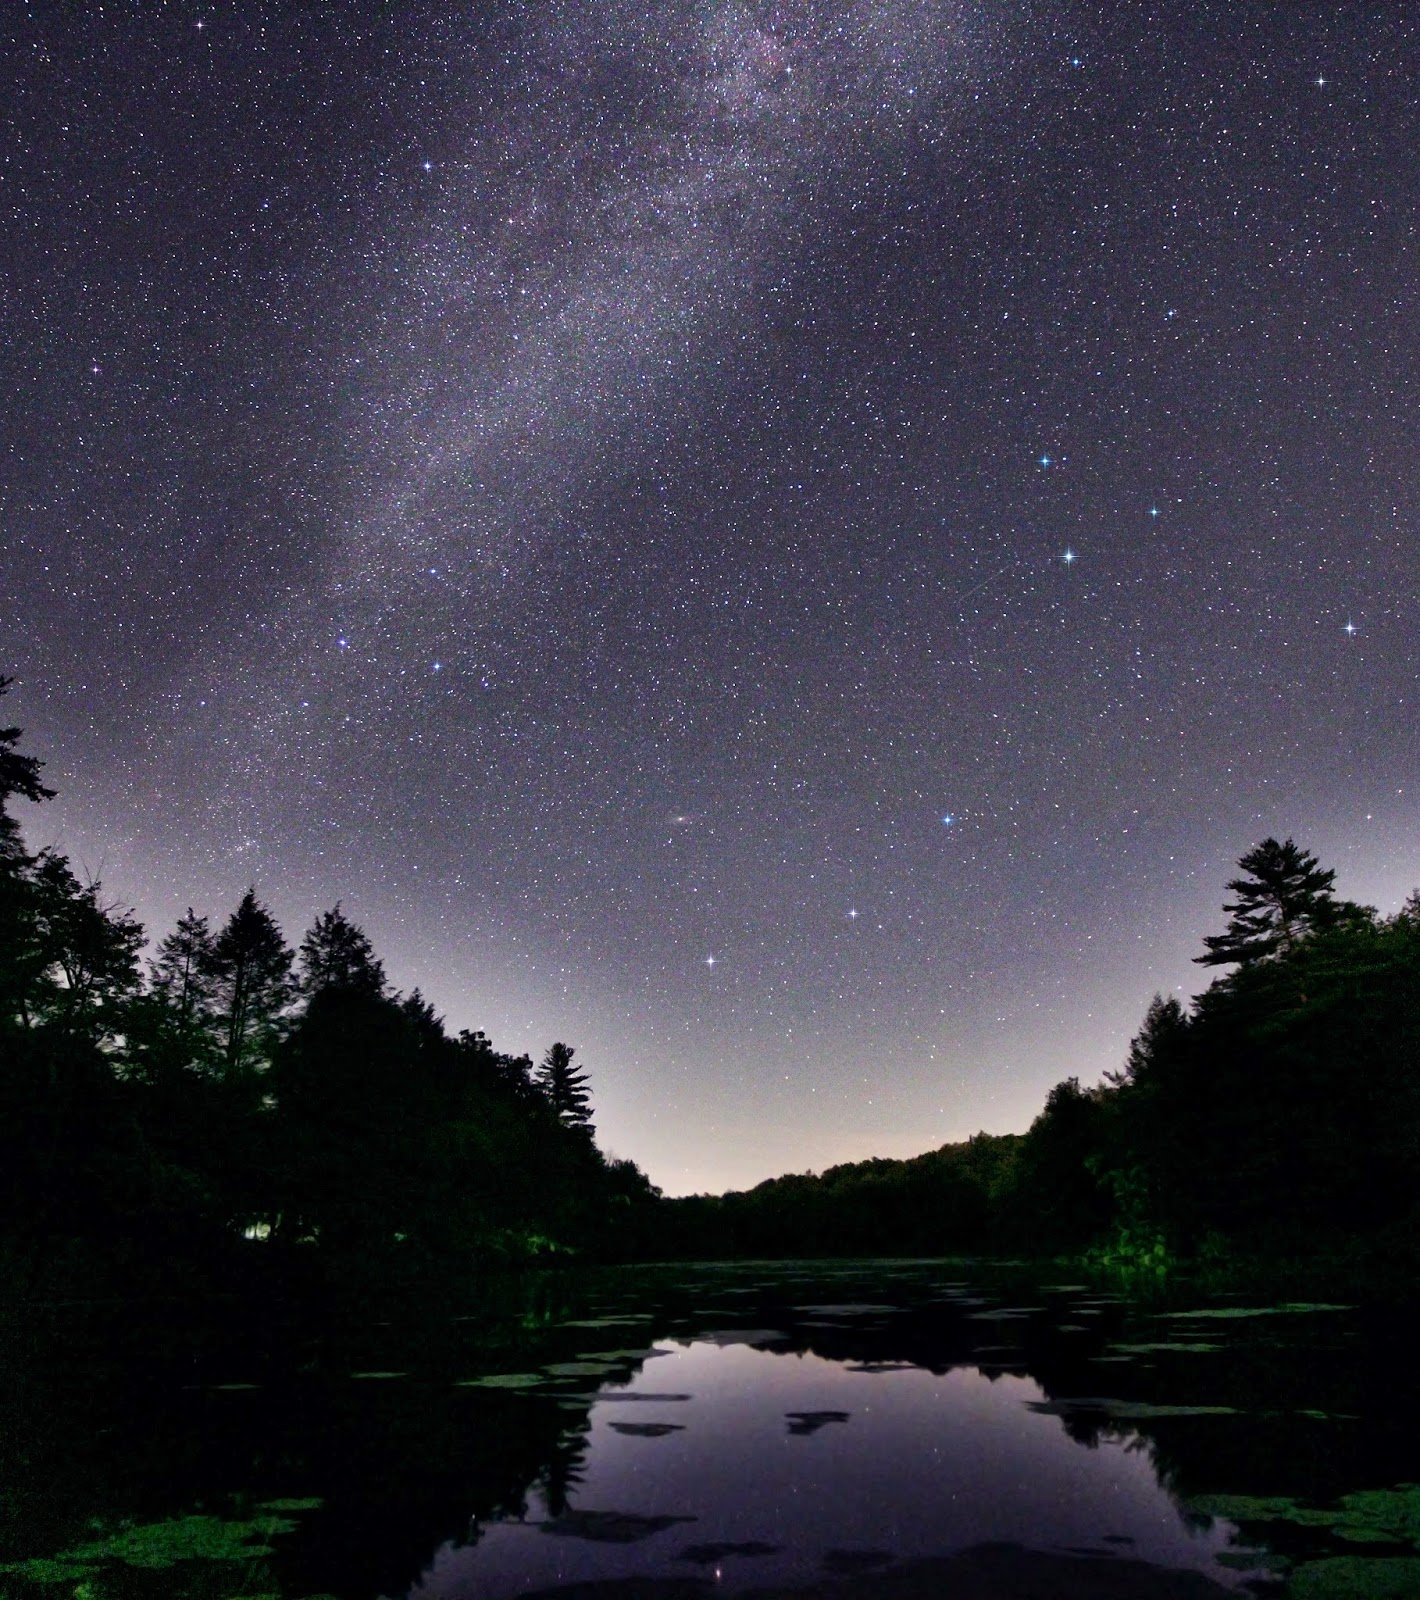 Astrophotography Blog: Milky way over lake and star reflection